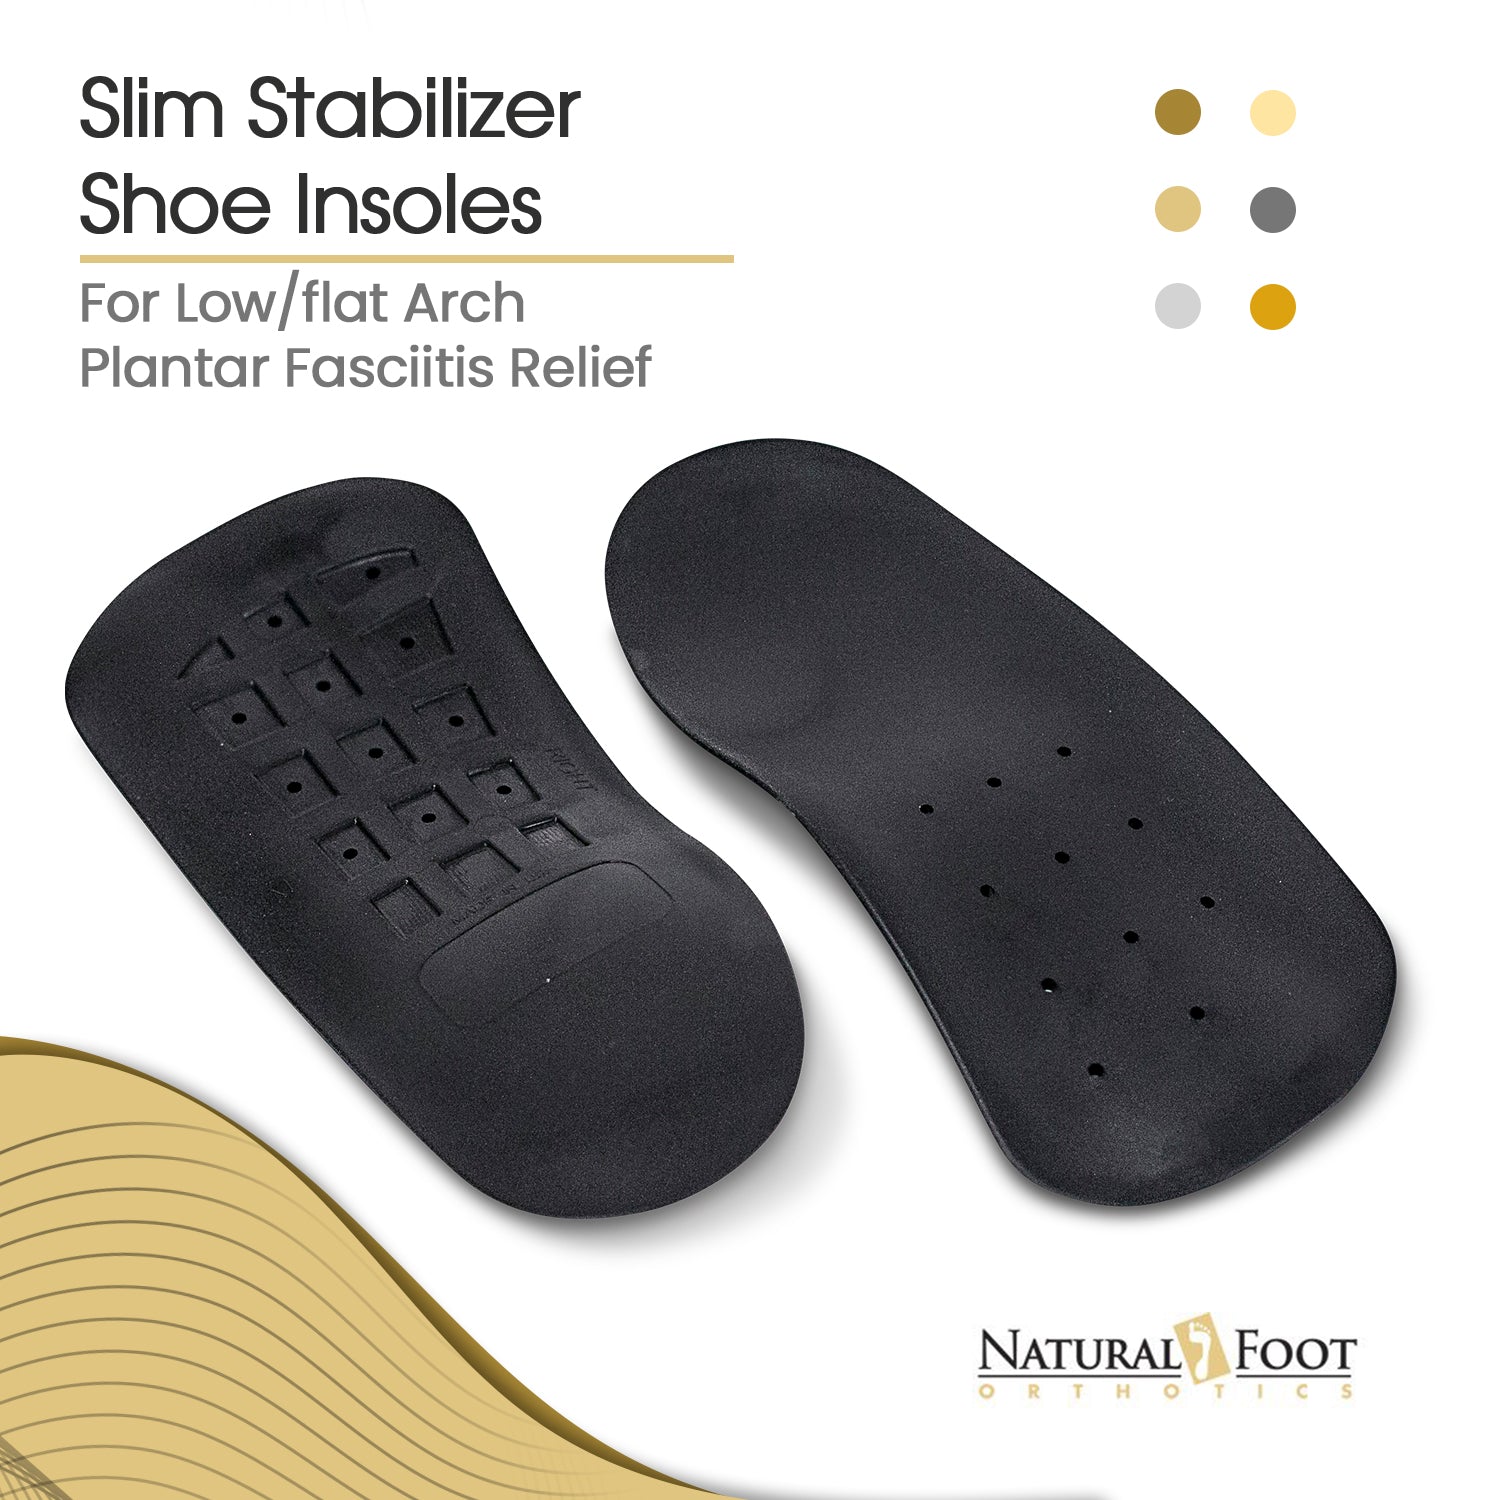 Slim Orthotic Stabilizer | Insoles Designed for Low to Flat Arches